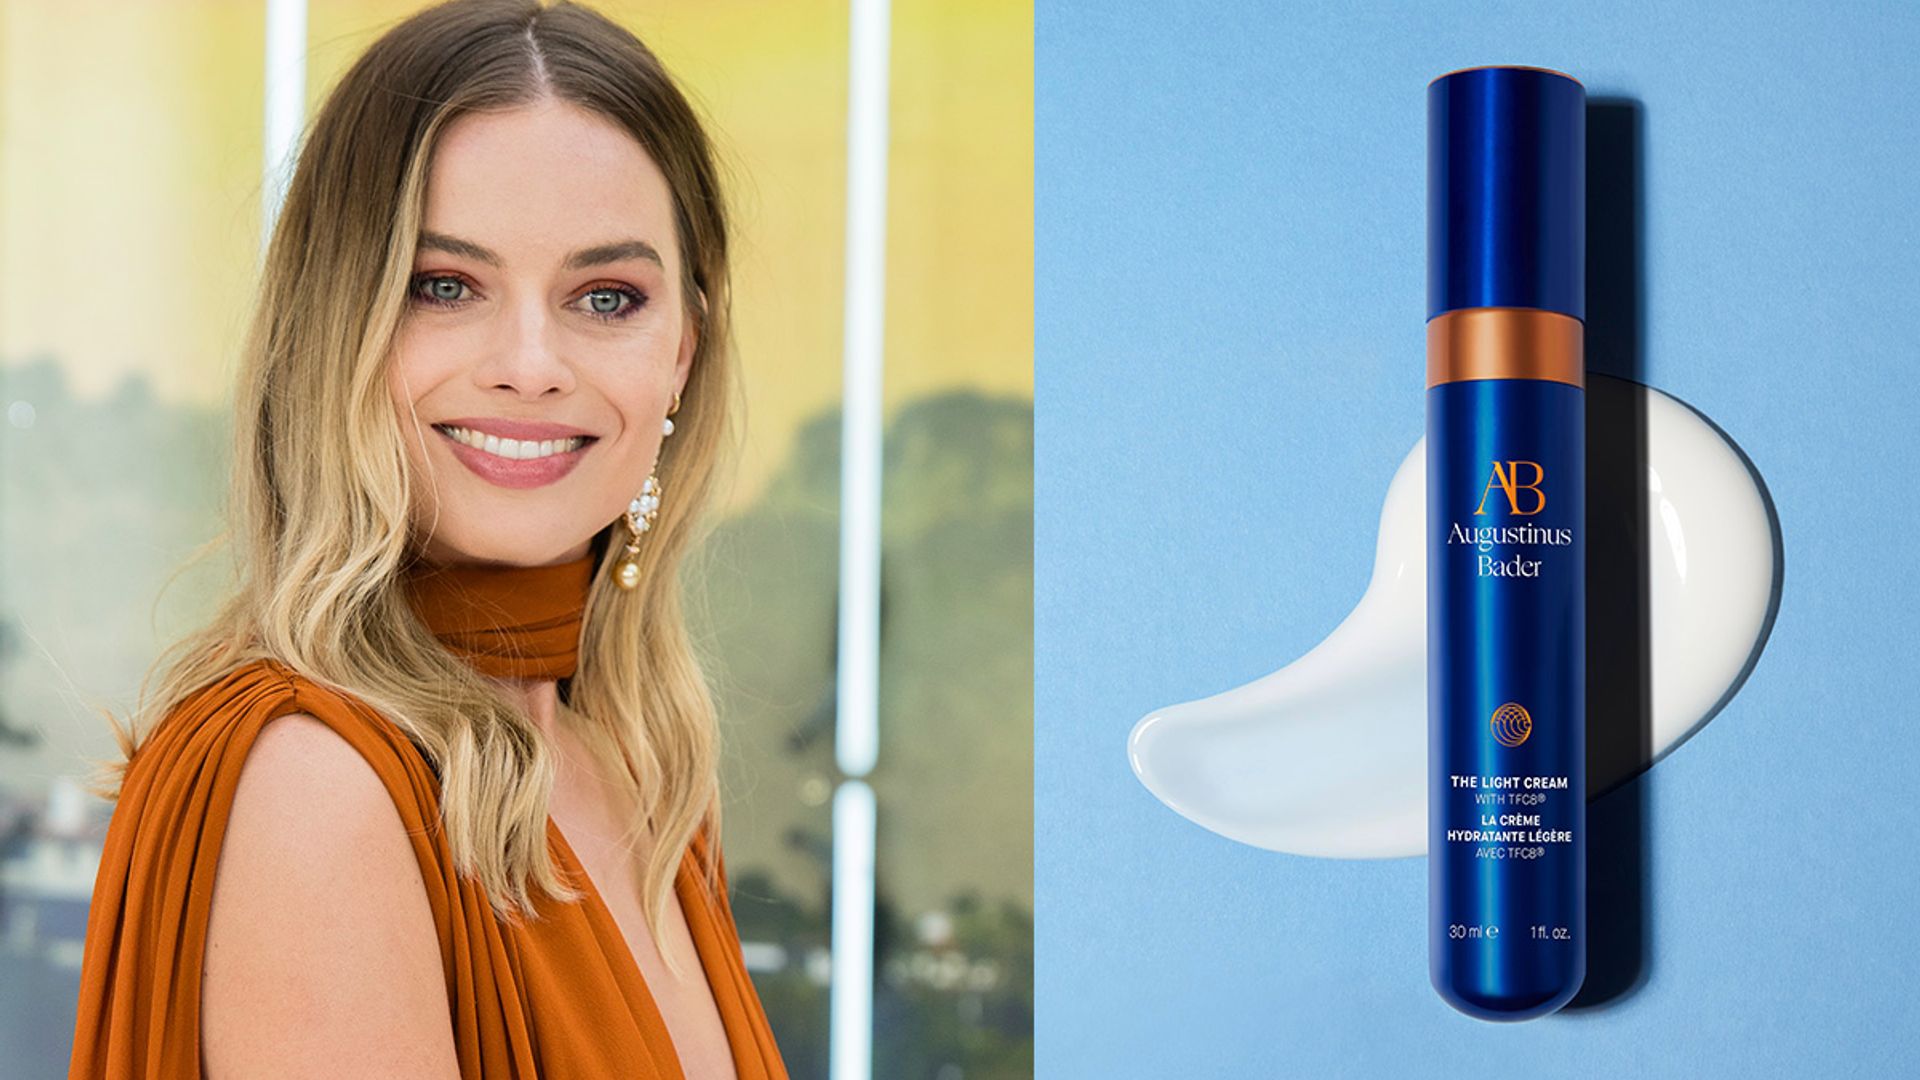 Summer skincare: the new mattifying cream from Augustinus Bader, the beauty brand loved by Margot Robbie